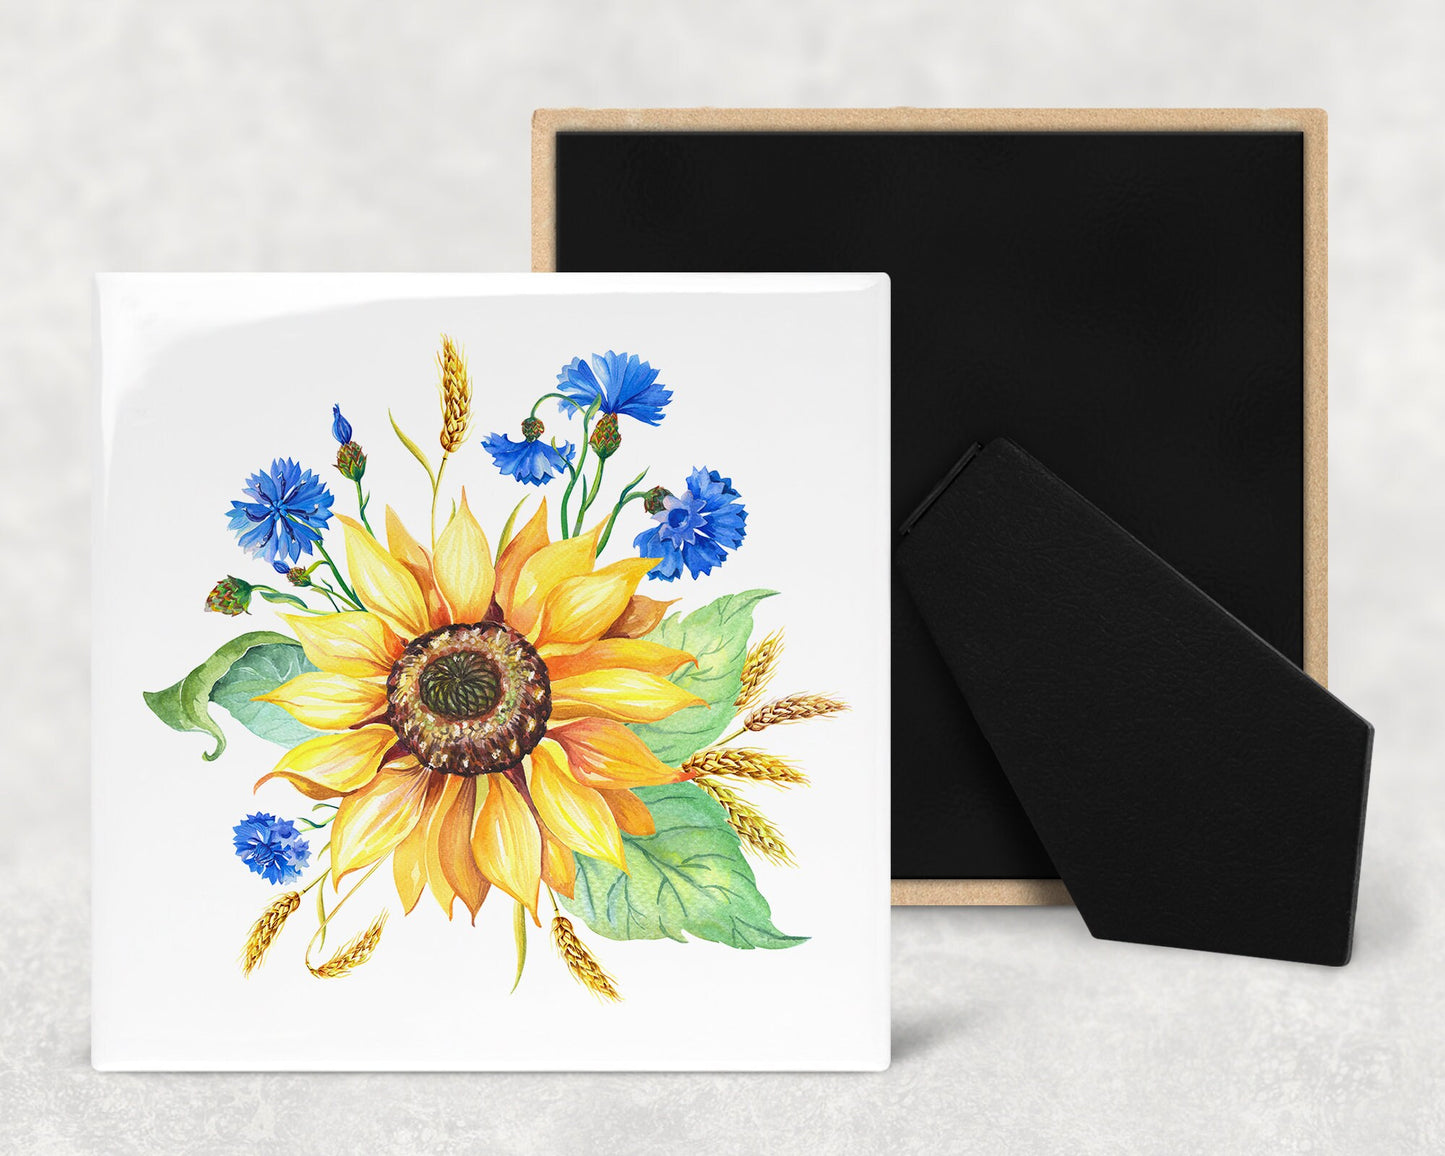 Sunflower and Blue Blossoms Art Decorative Ceramic Tile with Optional Easel Back - Available in 3 Sizes